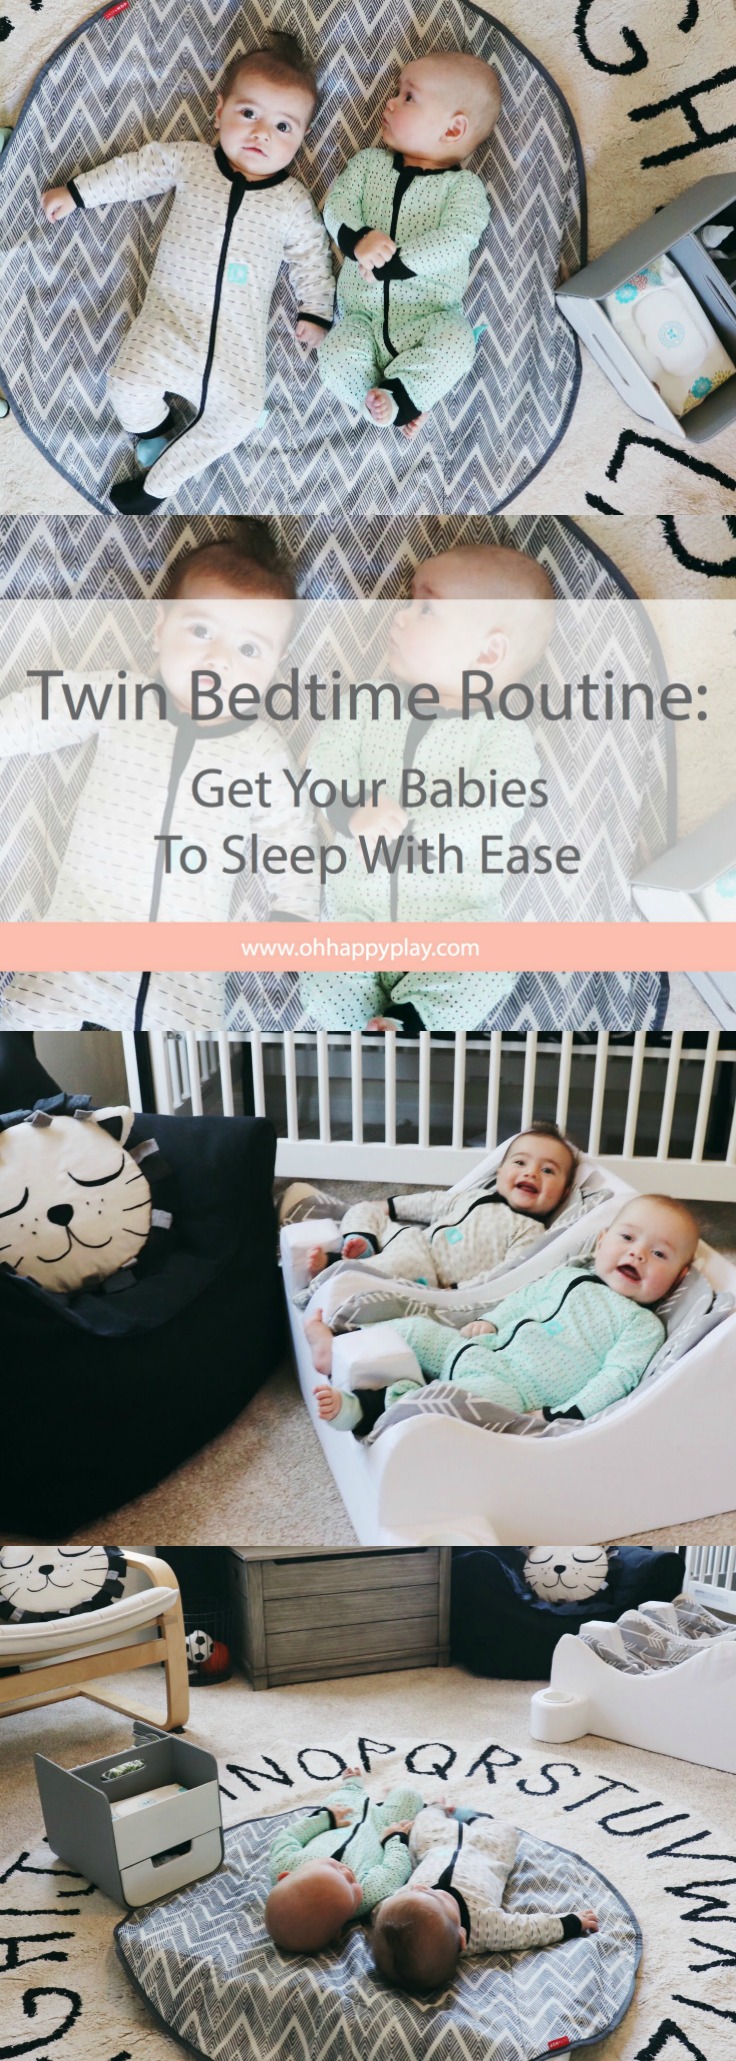 Get Your Babies To Sleep With Ease, Oh Happy Play, a Florida Motherhood blogger shares her twin bedtime routine! Check it out now!